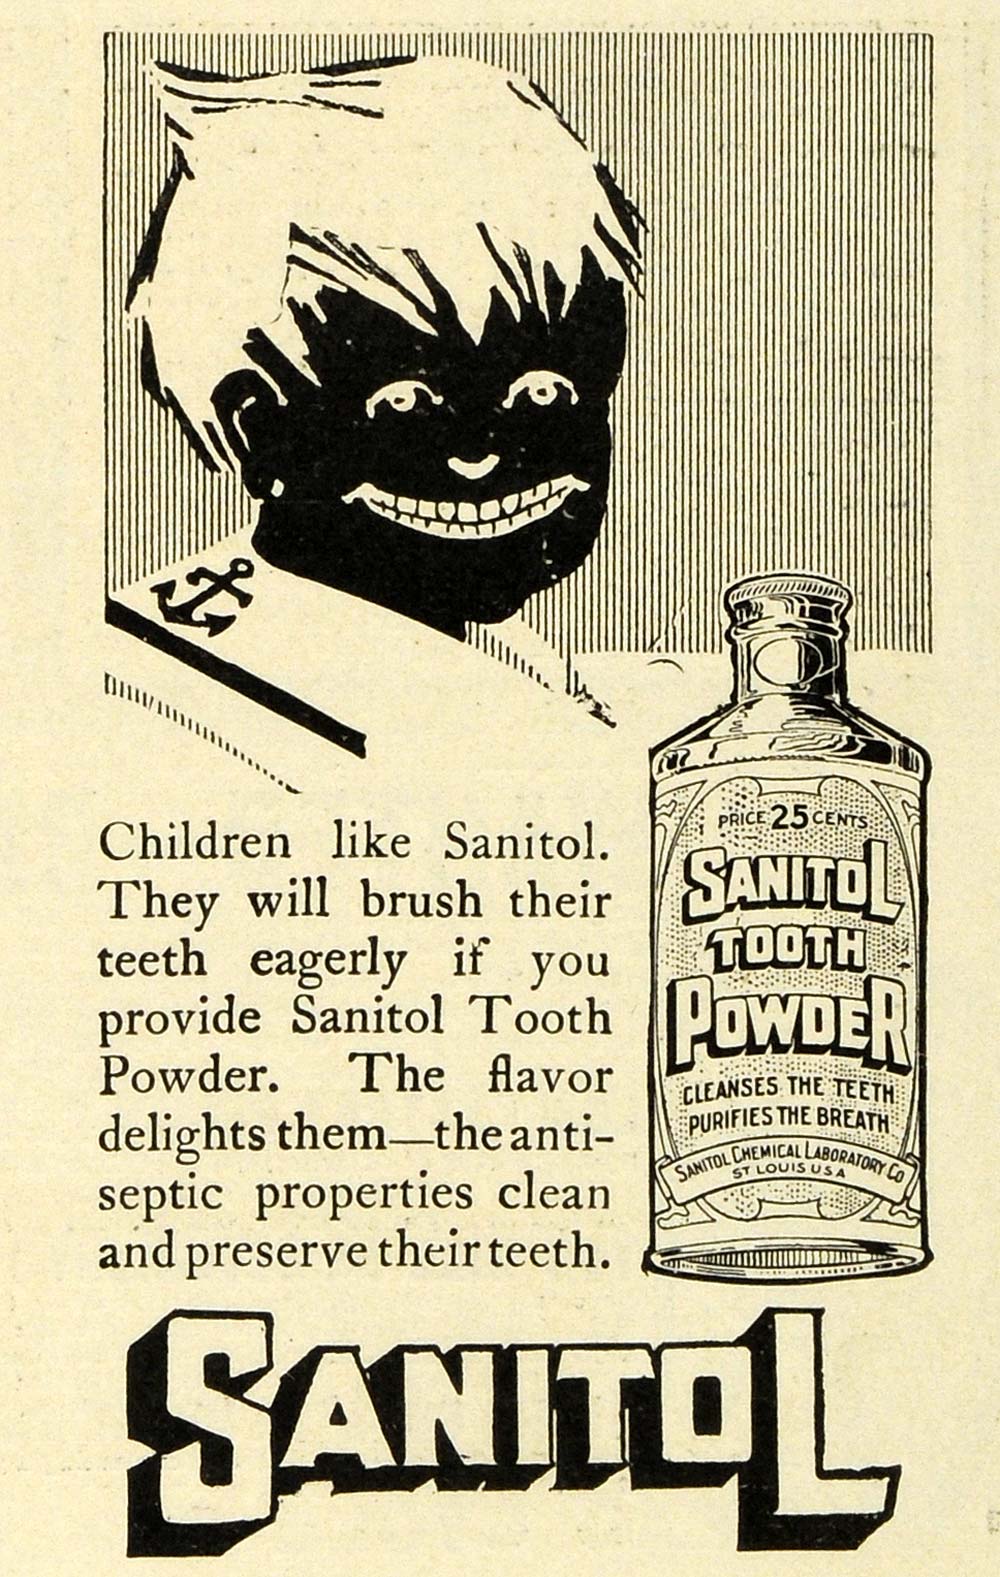 1911 Ad Sanitol Chemical Laboratory Co Tooth Powder Dental Care Cleansing MO EM2